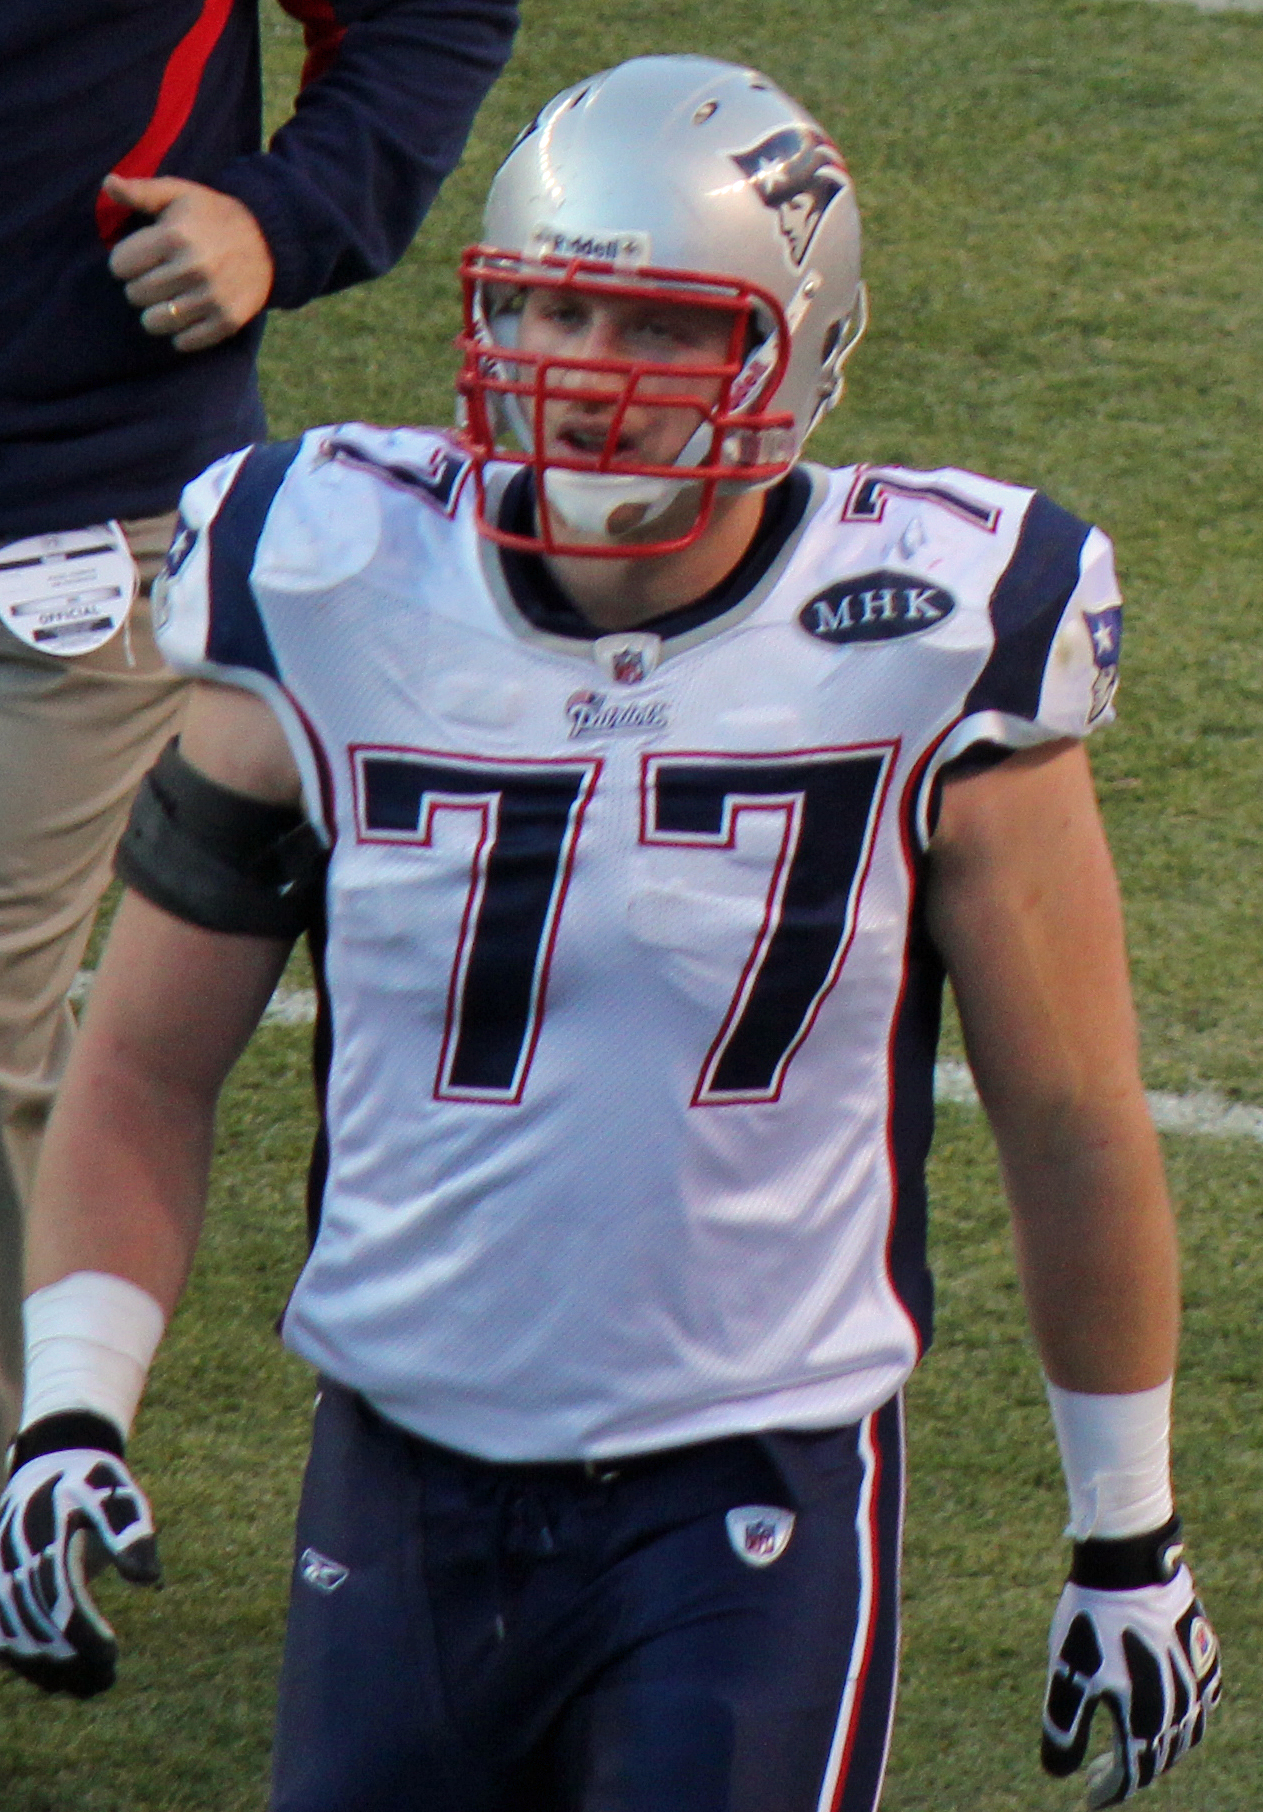 Ex-New England Patriots offensive tackle Sebastian Vollmer says he plans to  retire - ESPN